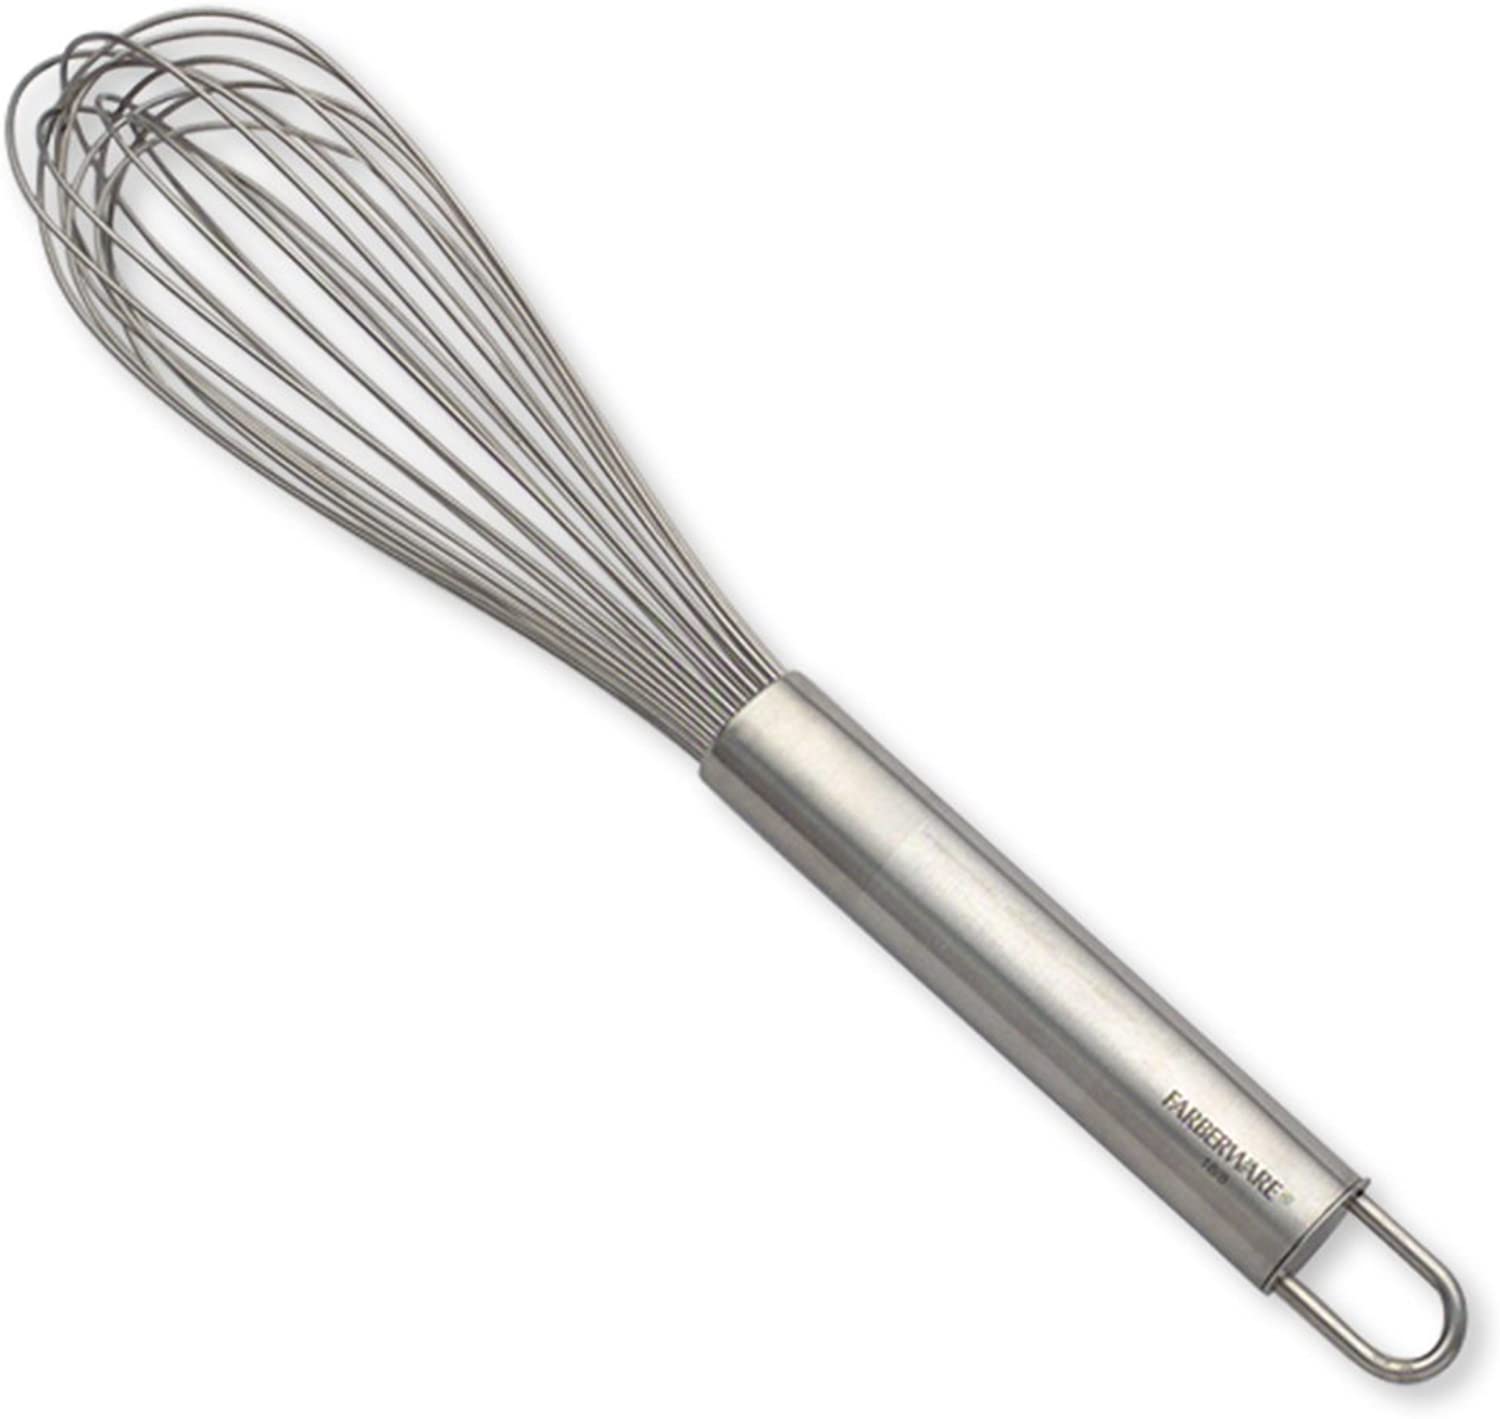  Ouddy 3 Pack Stainless Steel Whisks 8+10+12, Wire